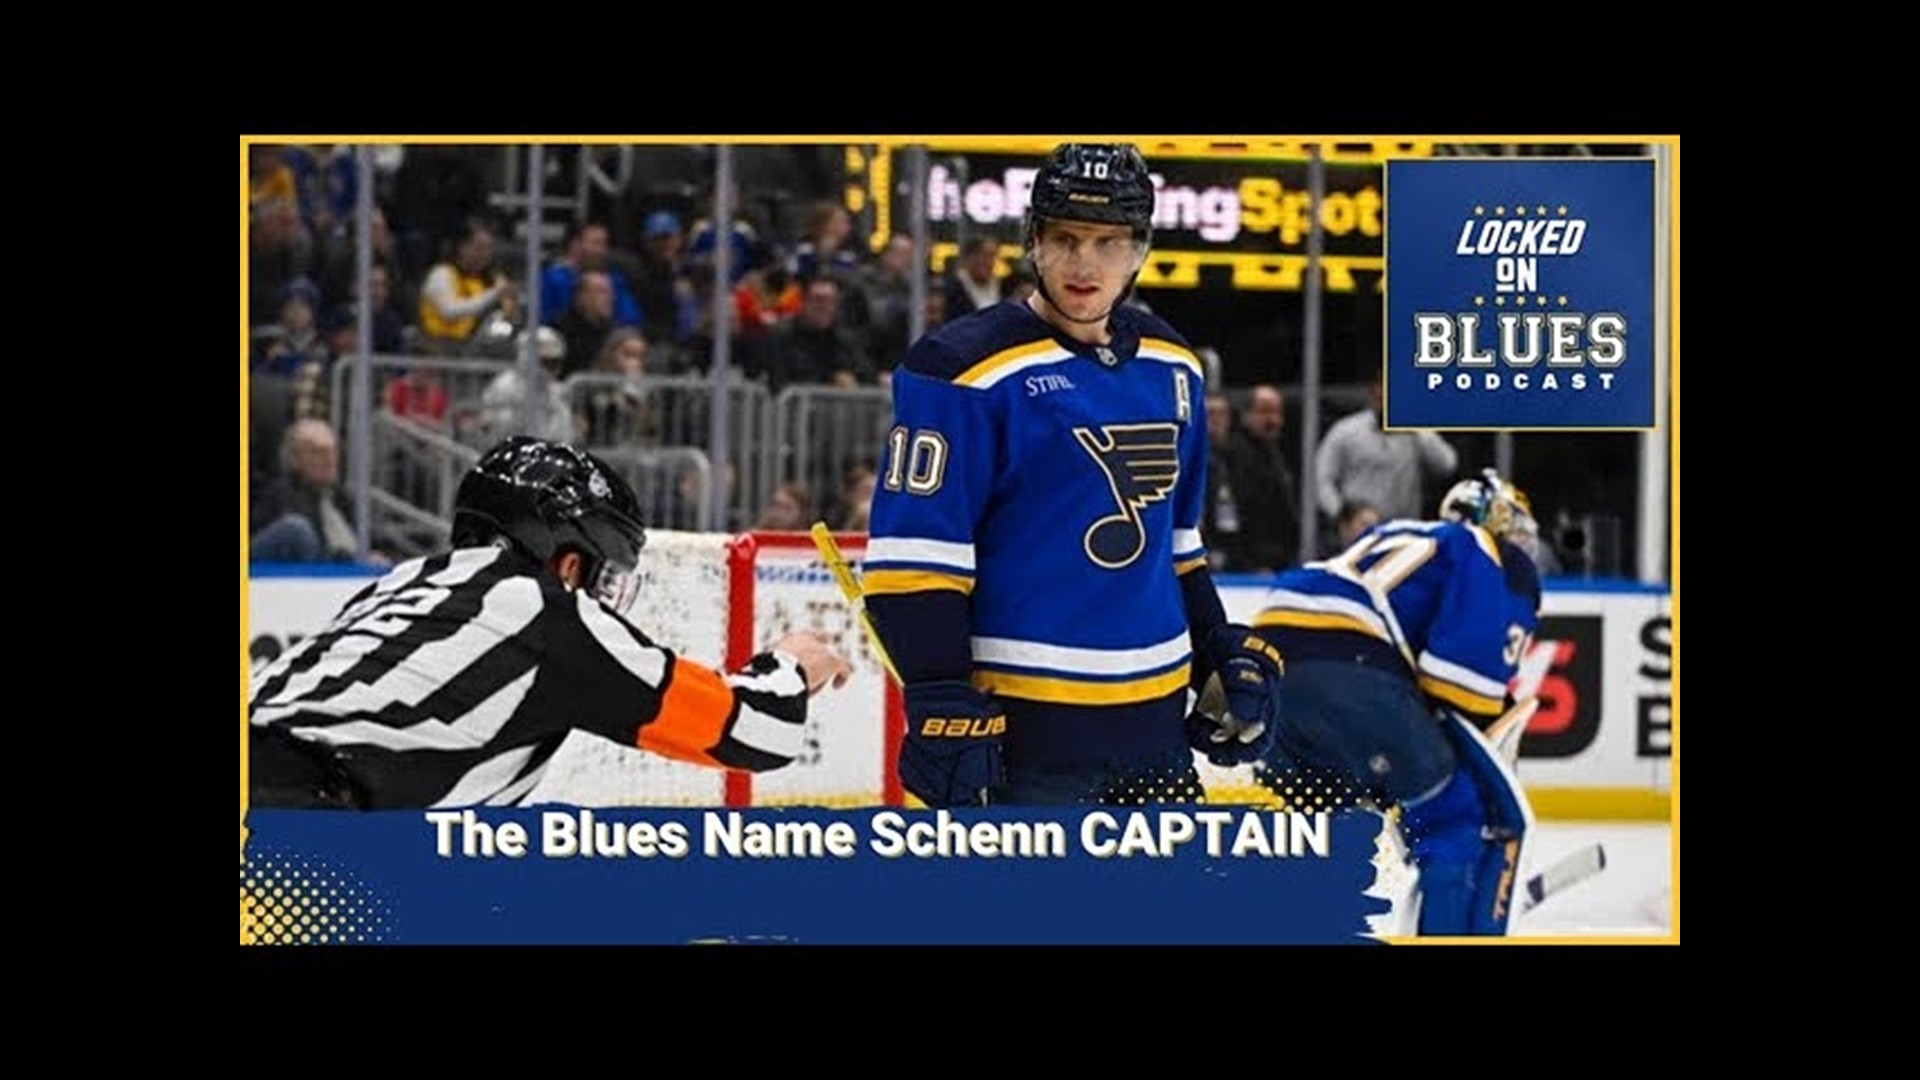 st louis blues game live feed